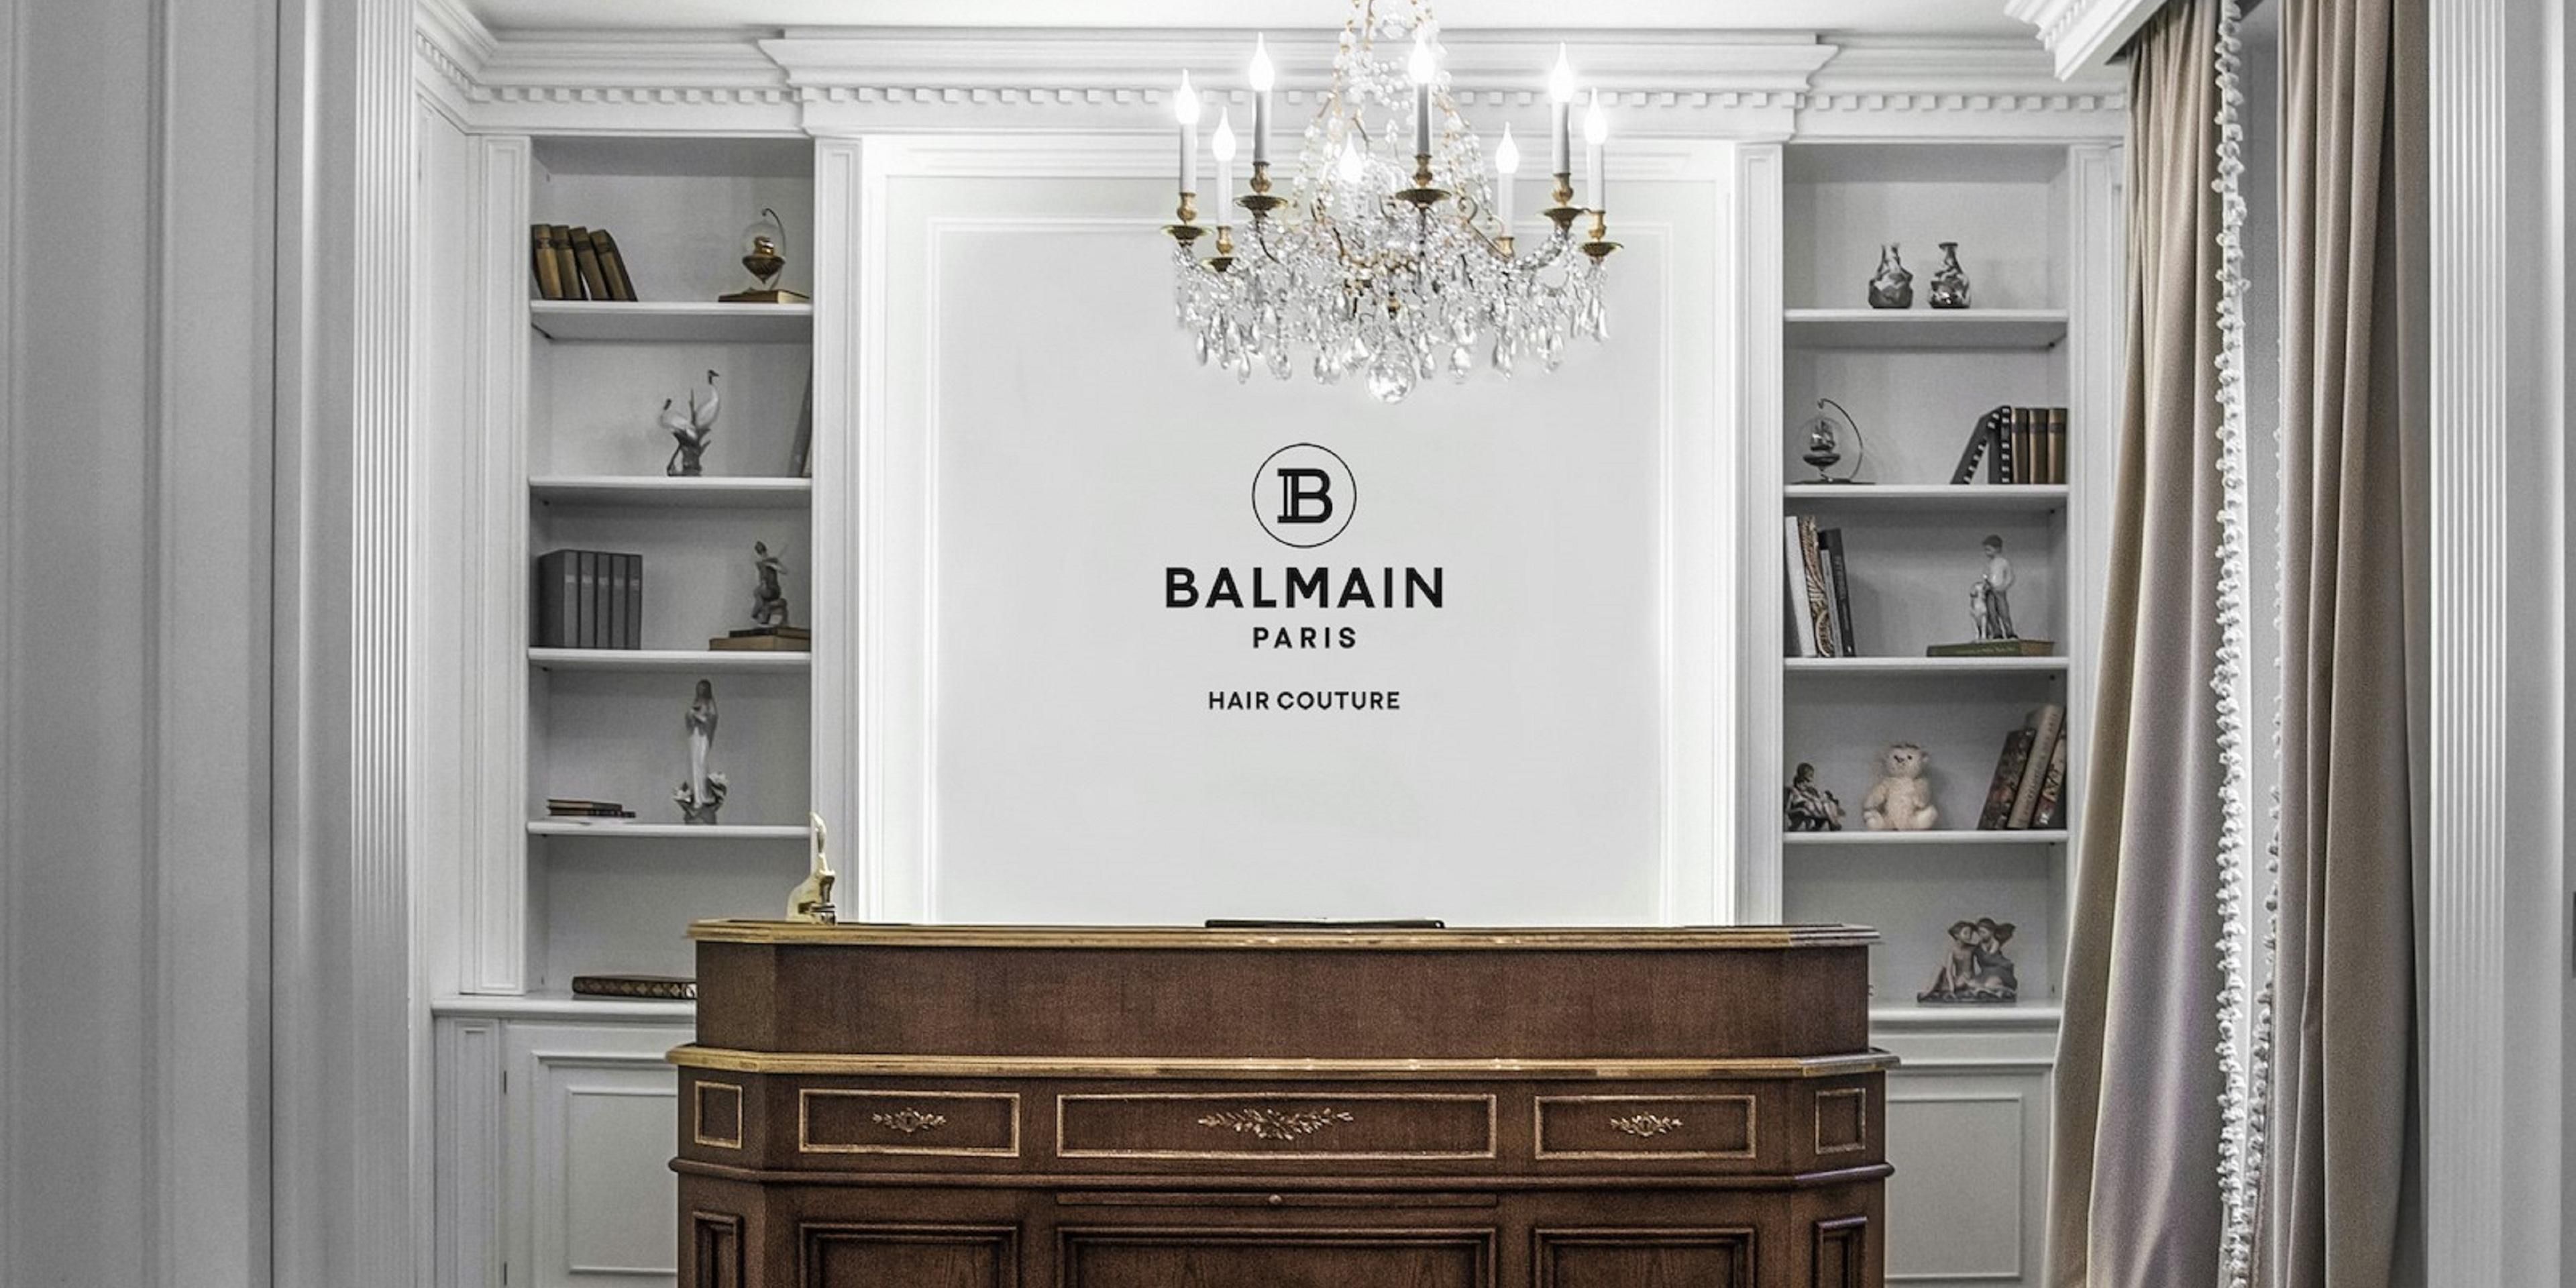 With Balmain Hair Couture’s rich heritage and ANJ Wellness’s exceptional ambiance, our spa offers unparalleled beauty treatments. Experience exclusive access to professional high-end cosmetic brands Paoma & Cellcosmet and a hair salon by Balmain Hair Couture.